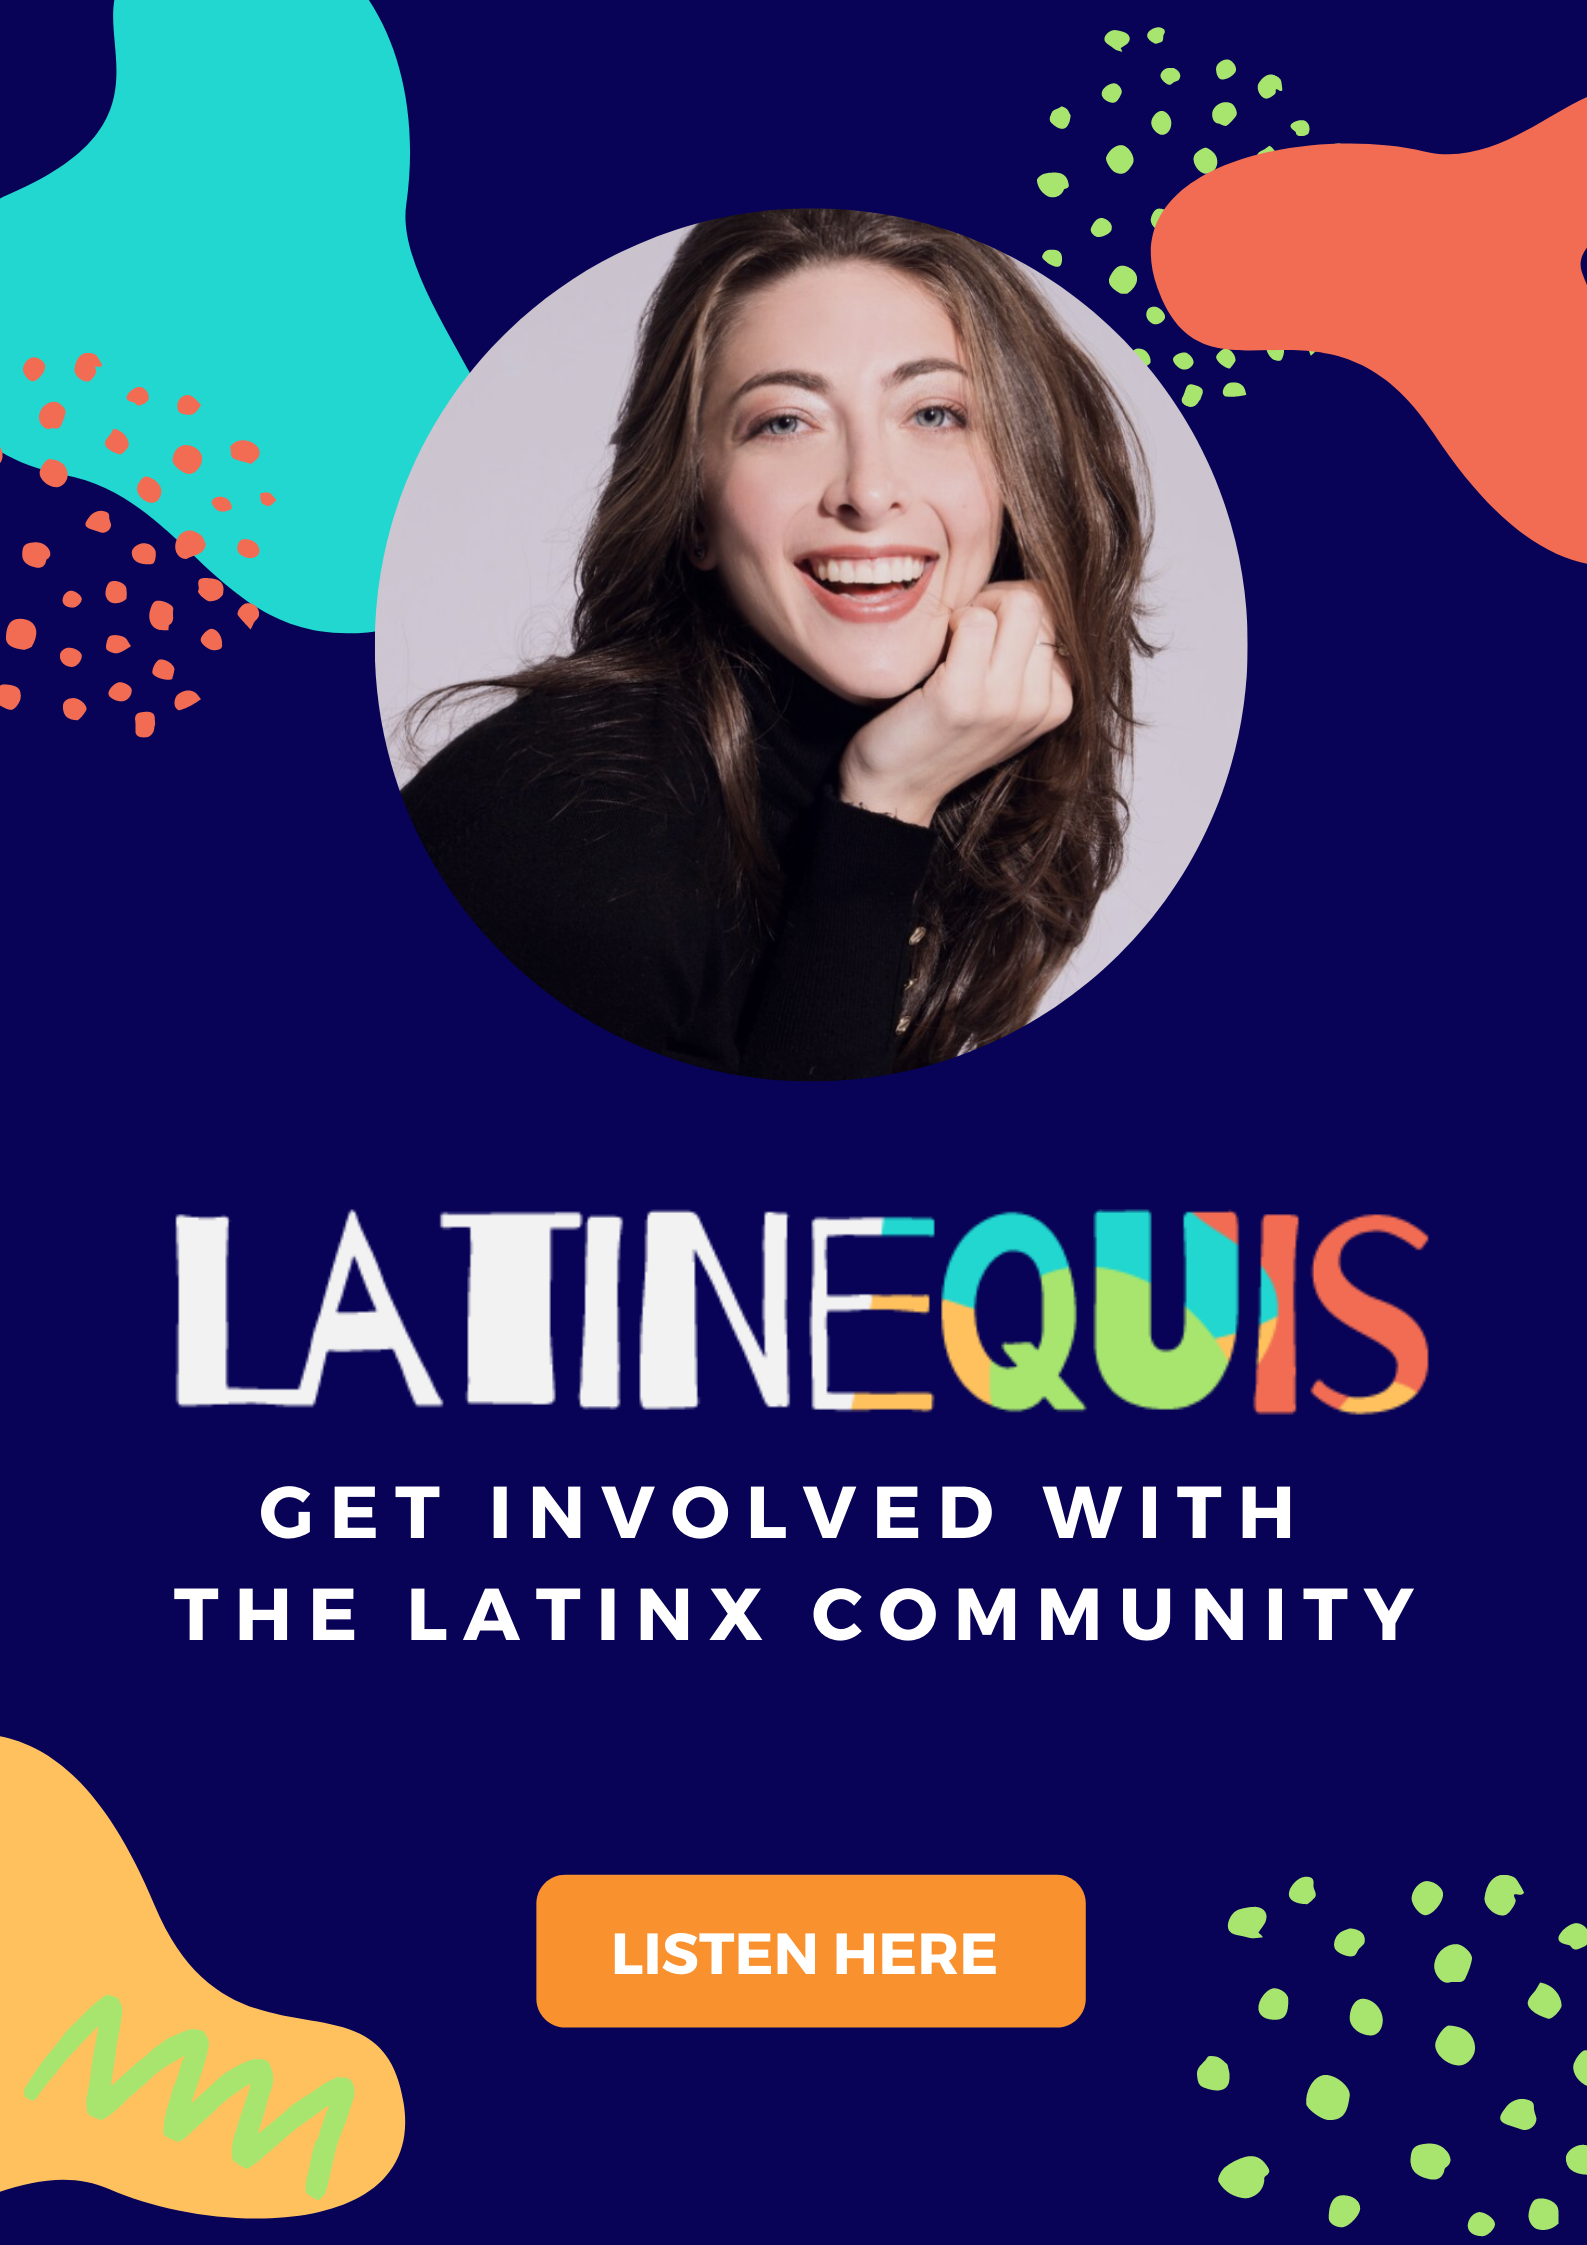 WEB BANNERS - LatinEQUIS.png